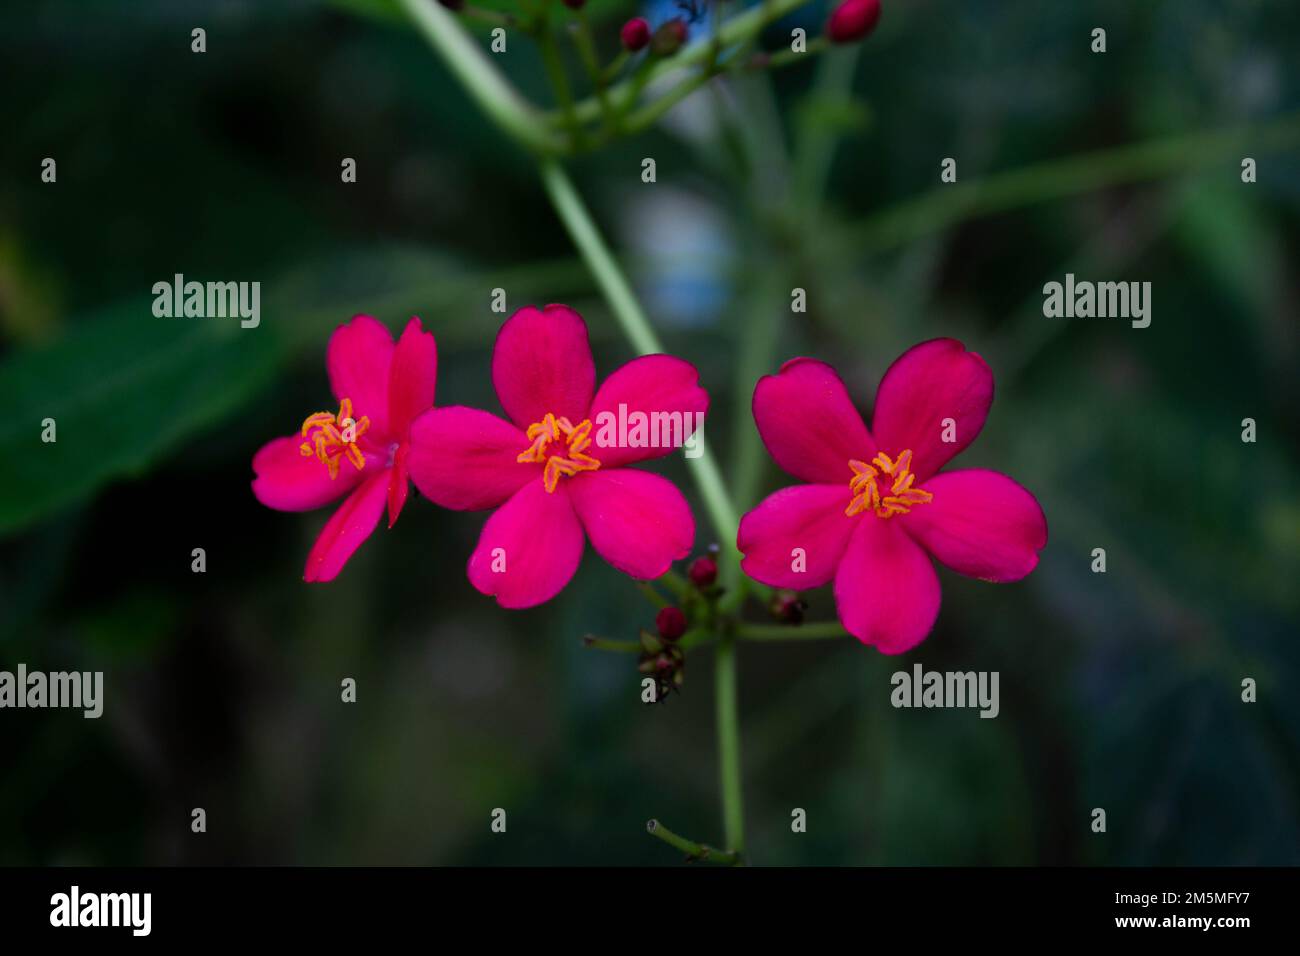 Red Peregrina flowers known as Spicy Jatropha bloom perfectly with blurred background Stock Photo